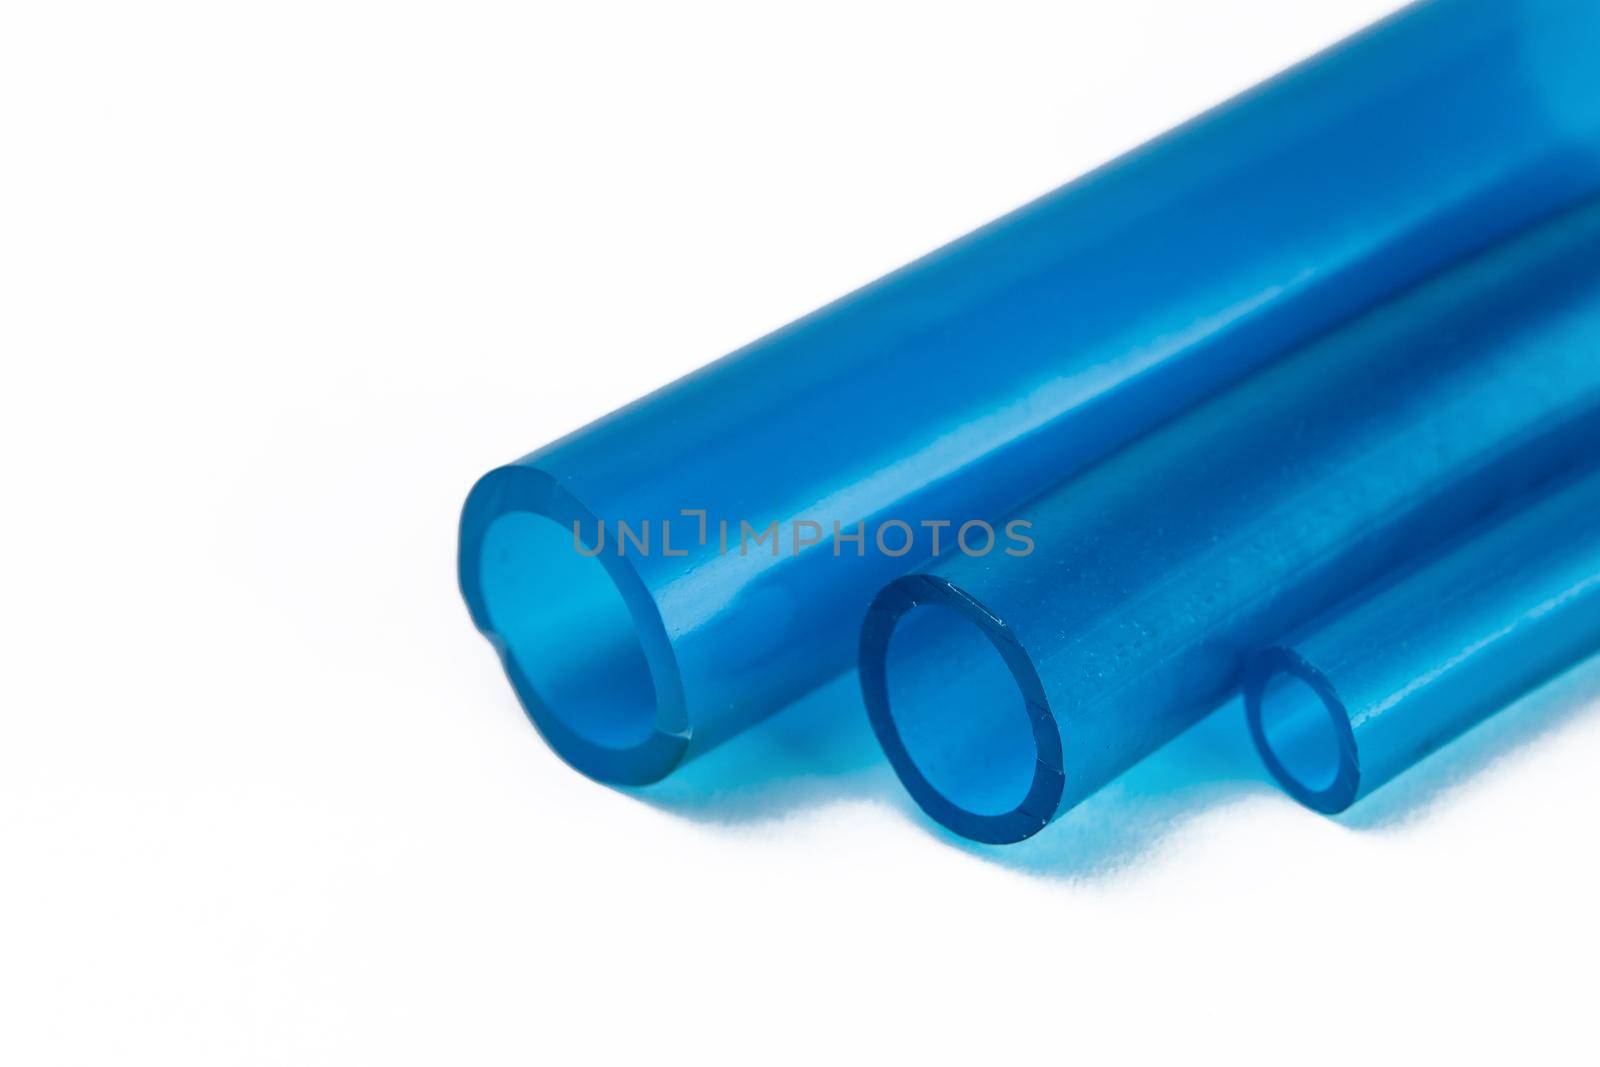 Tips of rubber hoses of different diameters, on a white background by deandy